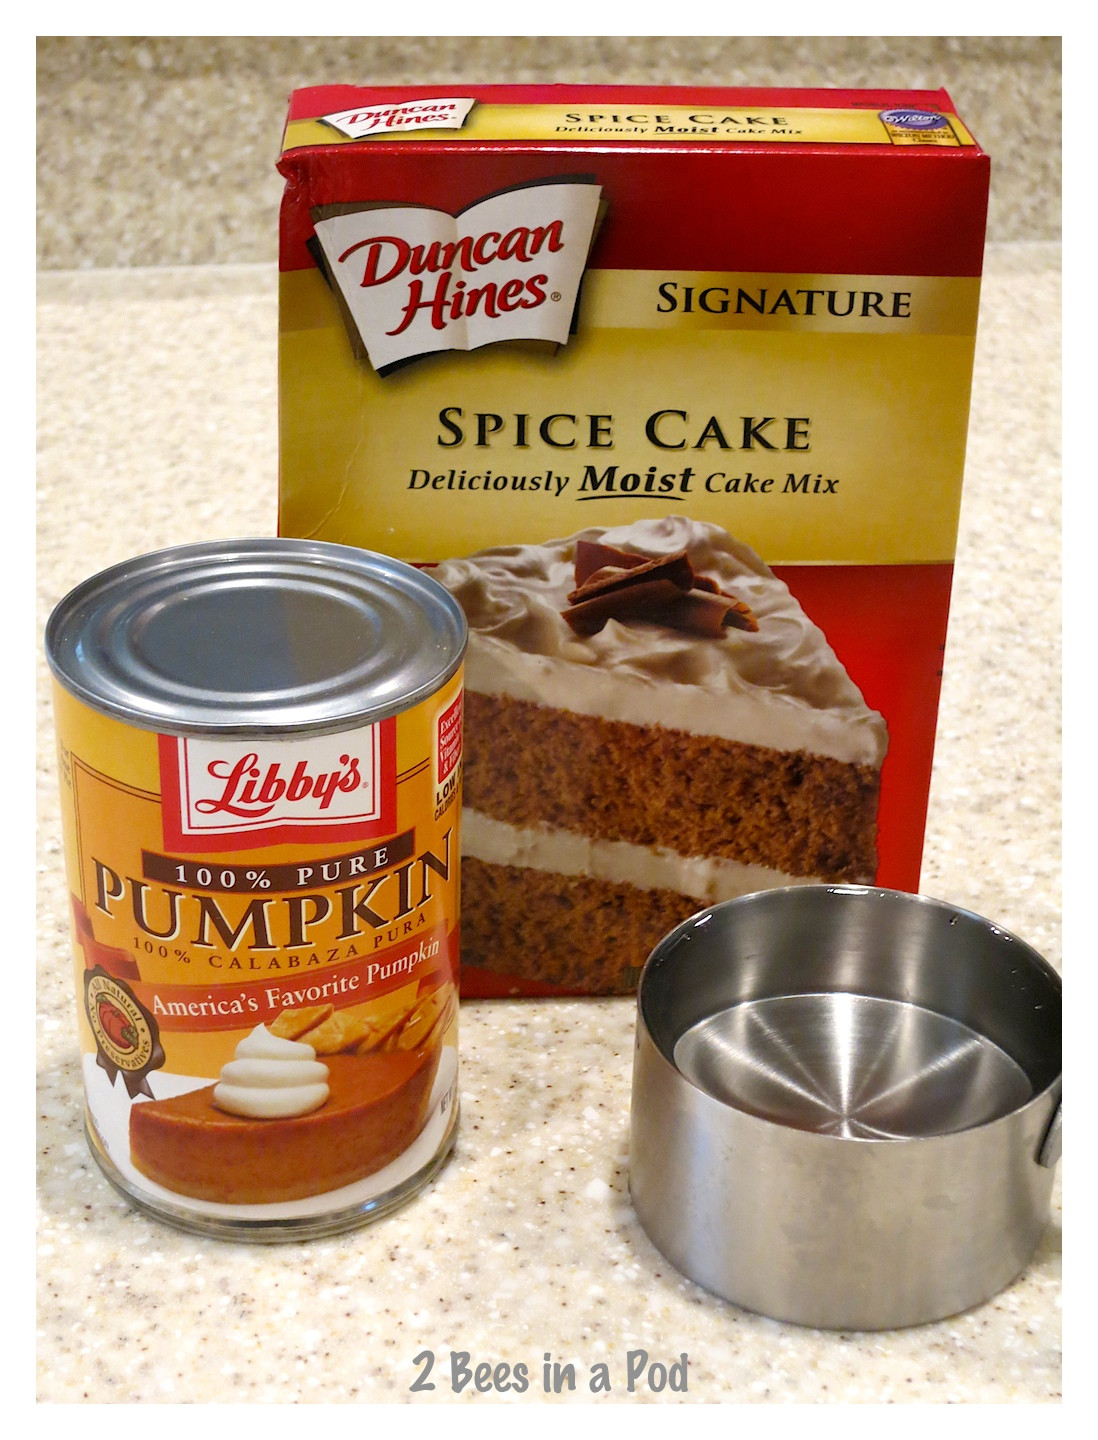 The Most Shared Weight Watchers Pumpkin Spice Cake
 Of All Time